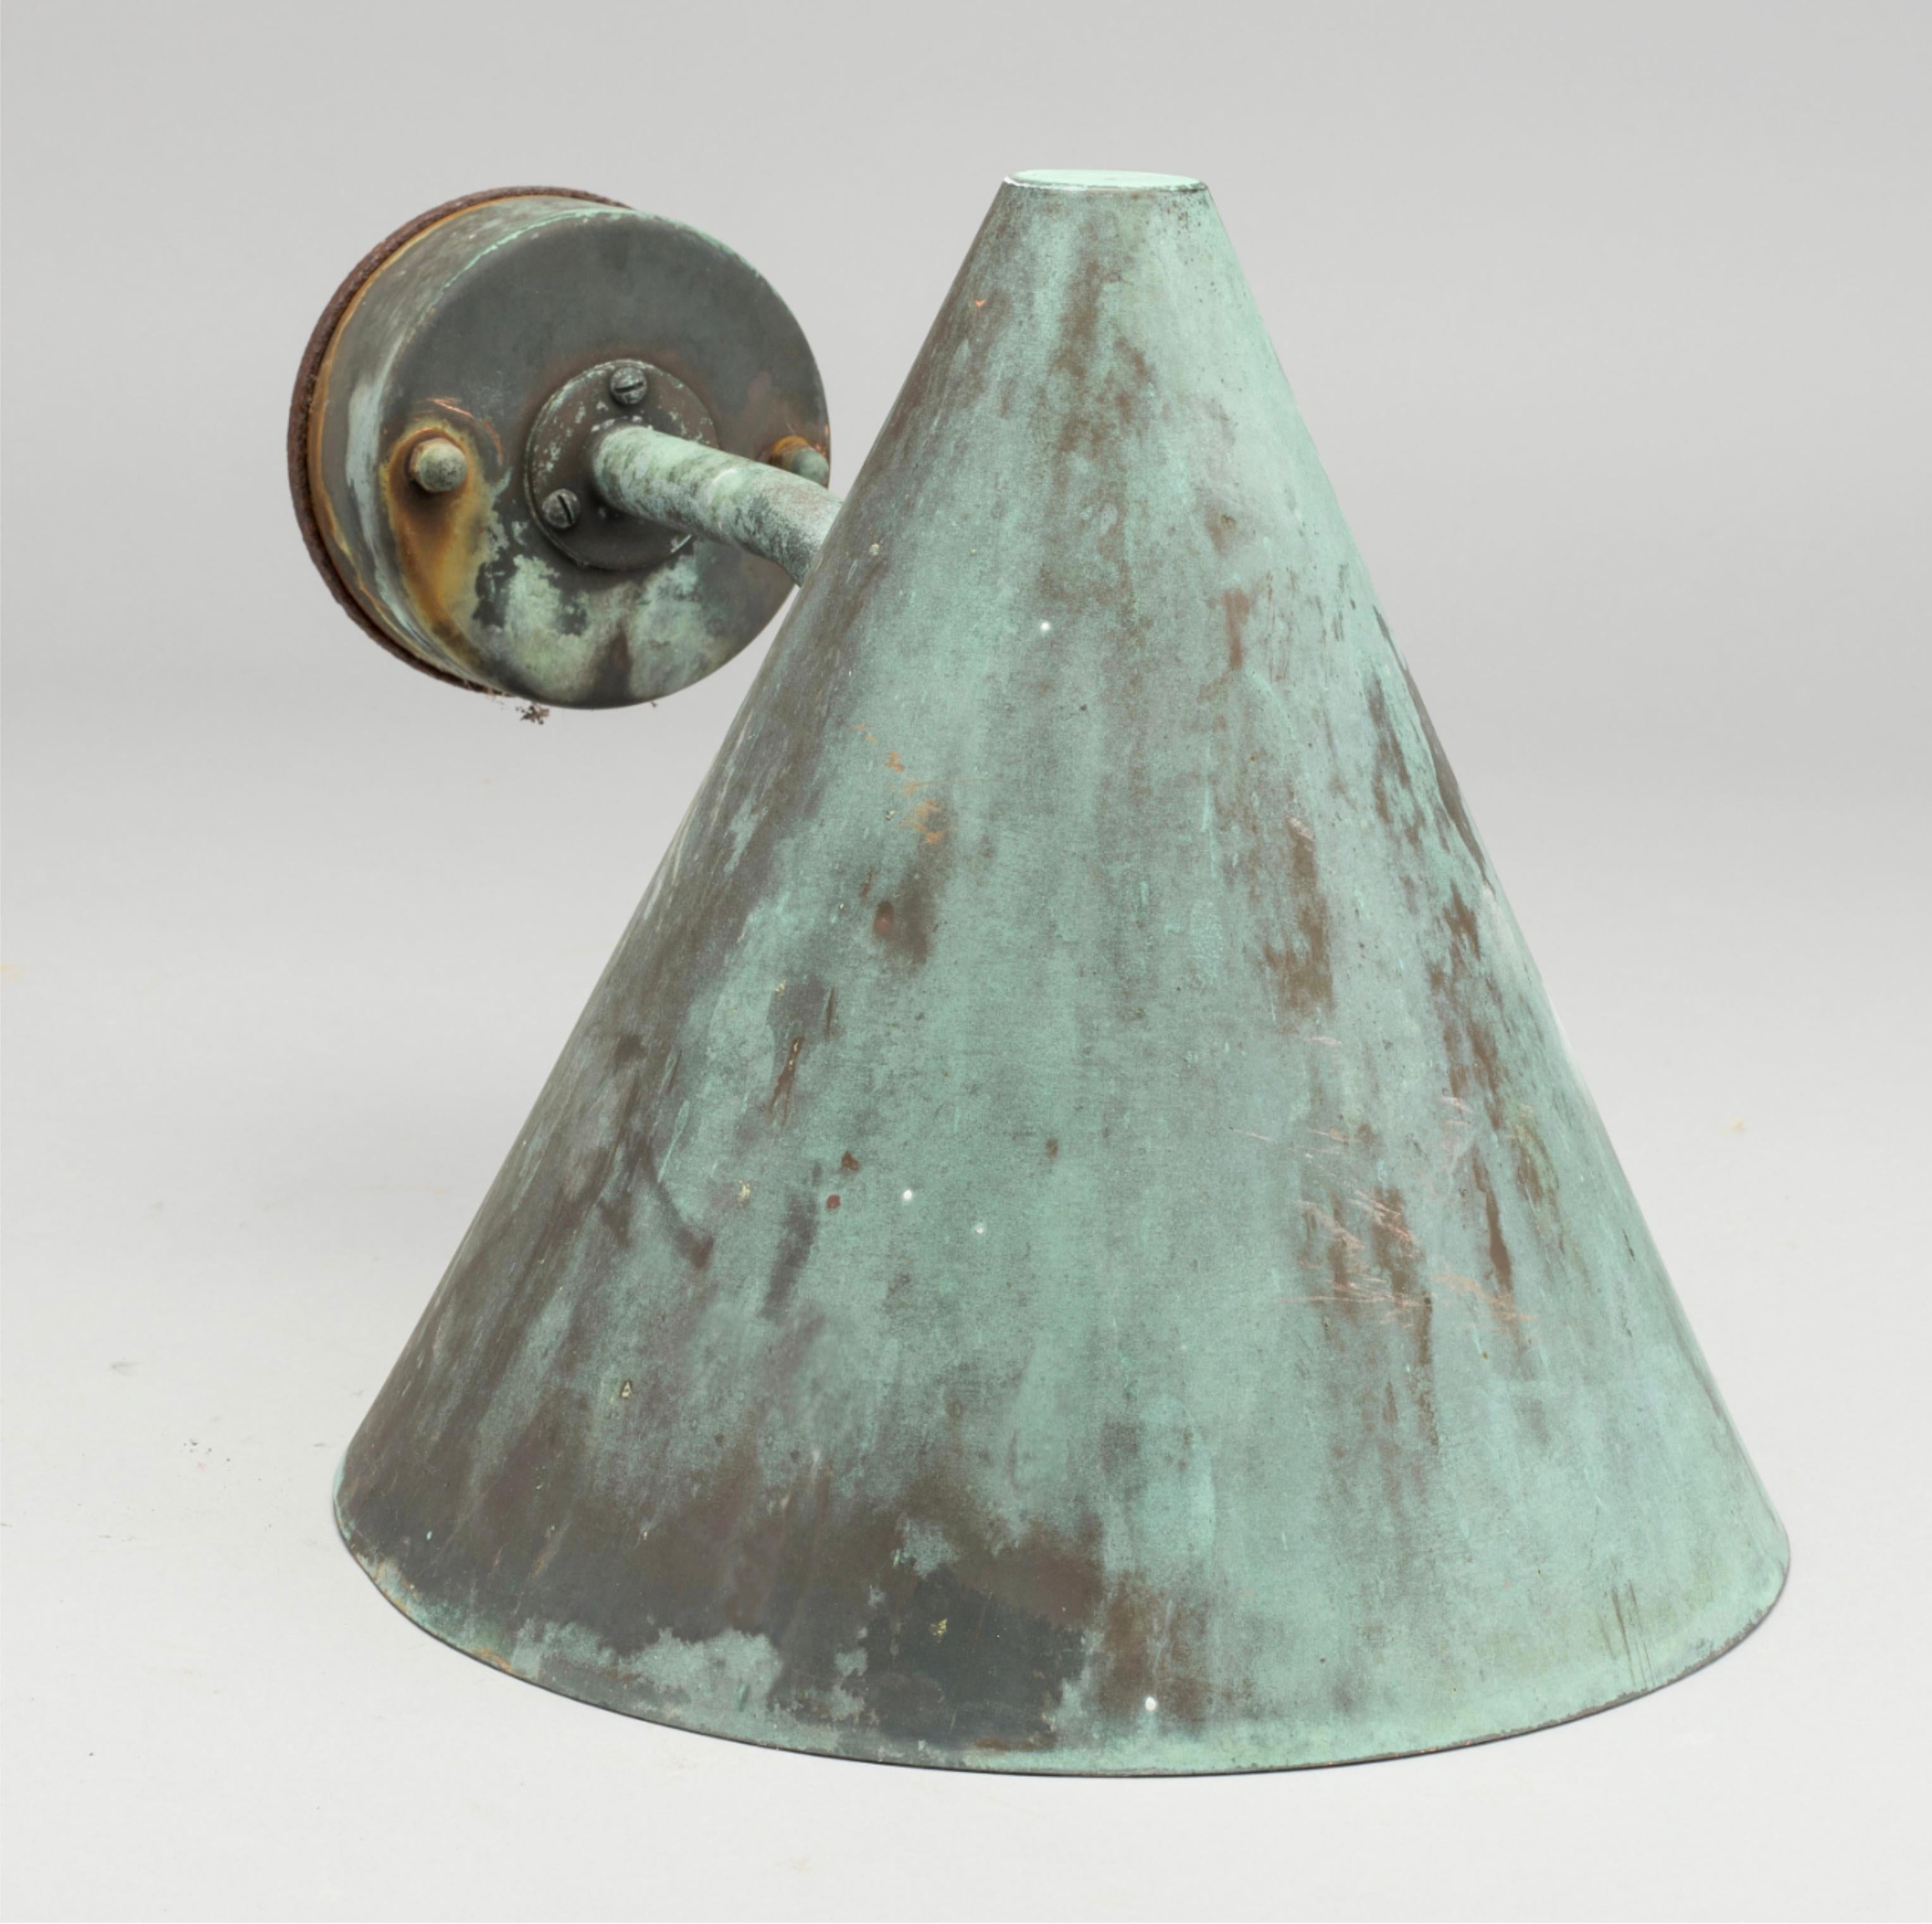 Hans-Agne Jakobsson for AB Markaryd, set of wall lights, in copper by Sweden, 1950s.
Large cone-shaped wall lights designed by Hans-Agne Jakobsson for AB Markaryd, in beautifully patinated copper. The light this model shines creates a beautiful